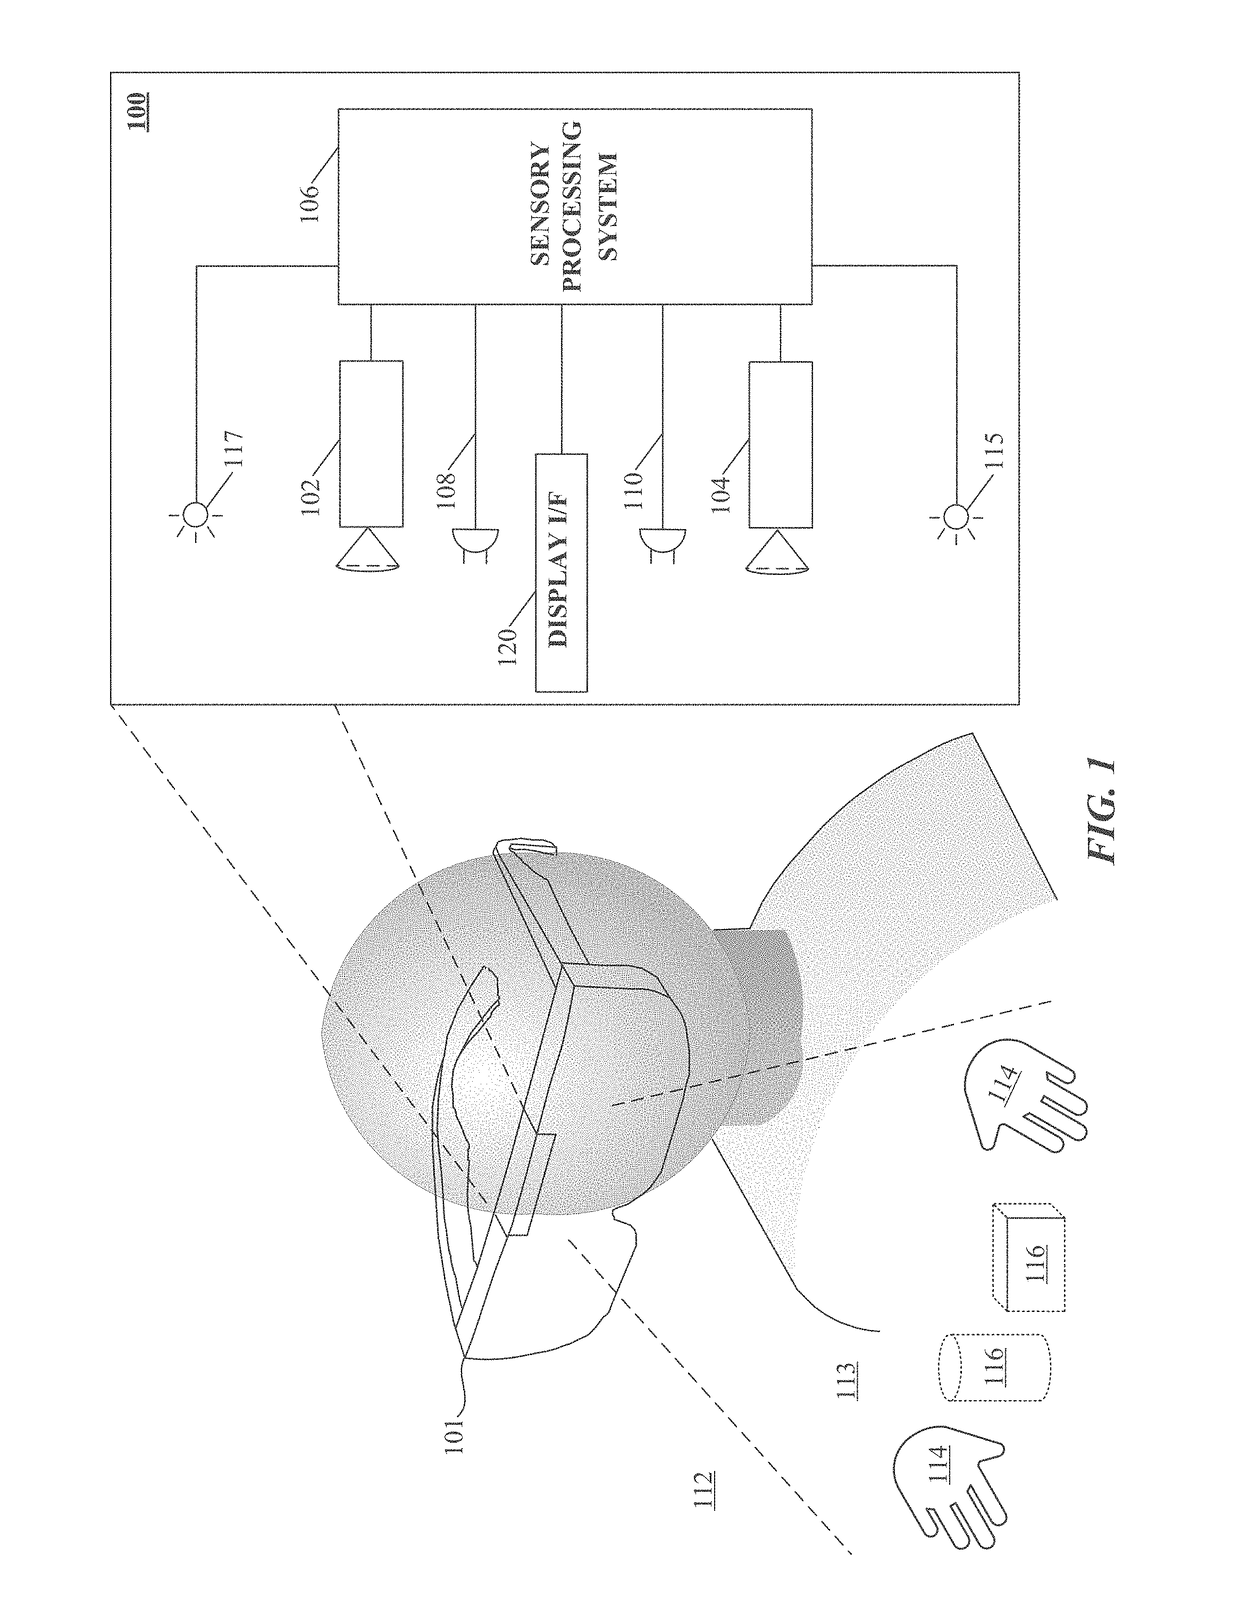 Safety for wearable virtual reality devices via object detection and tracking